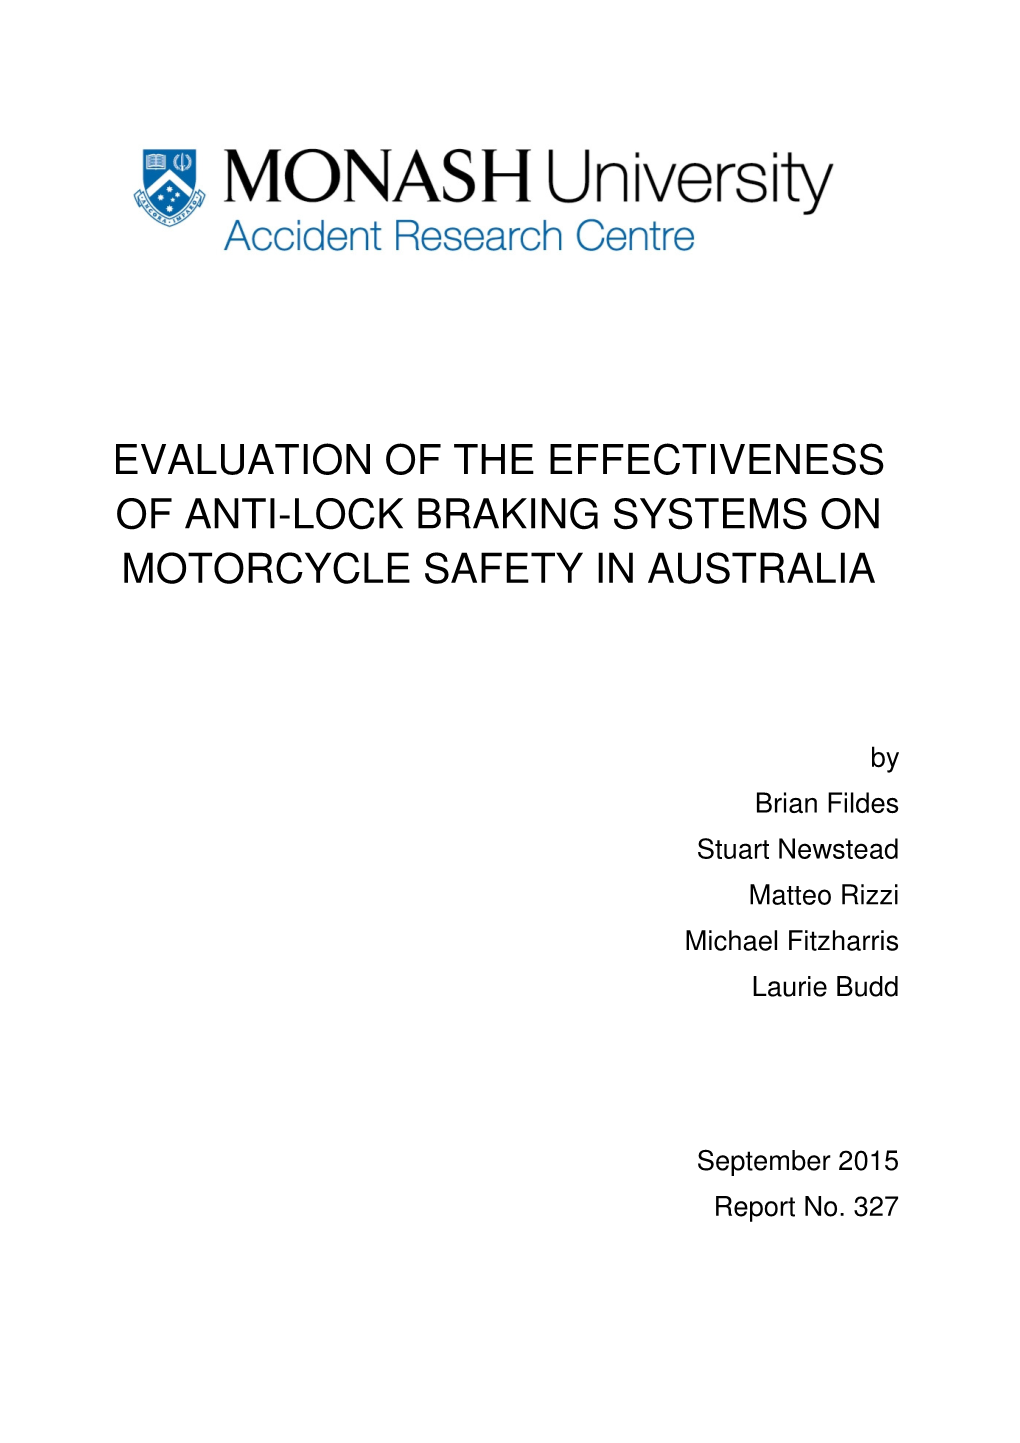 Evaluation of the Effectiveness of Anti-Lock Braking Systems on Motorcycle Safety in Australia